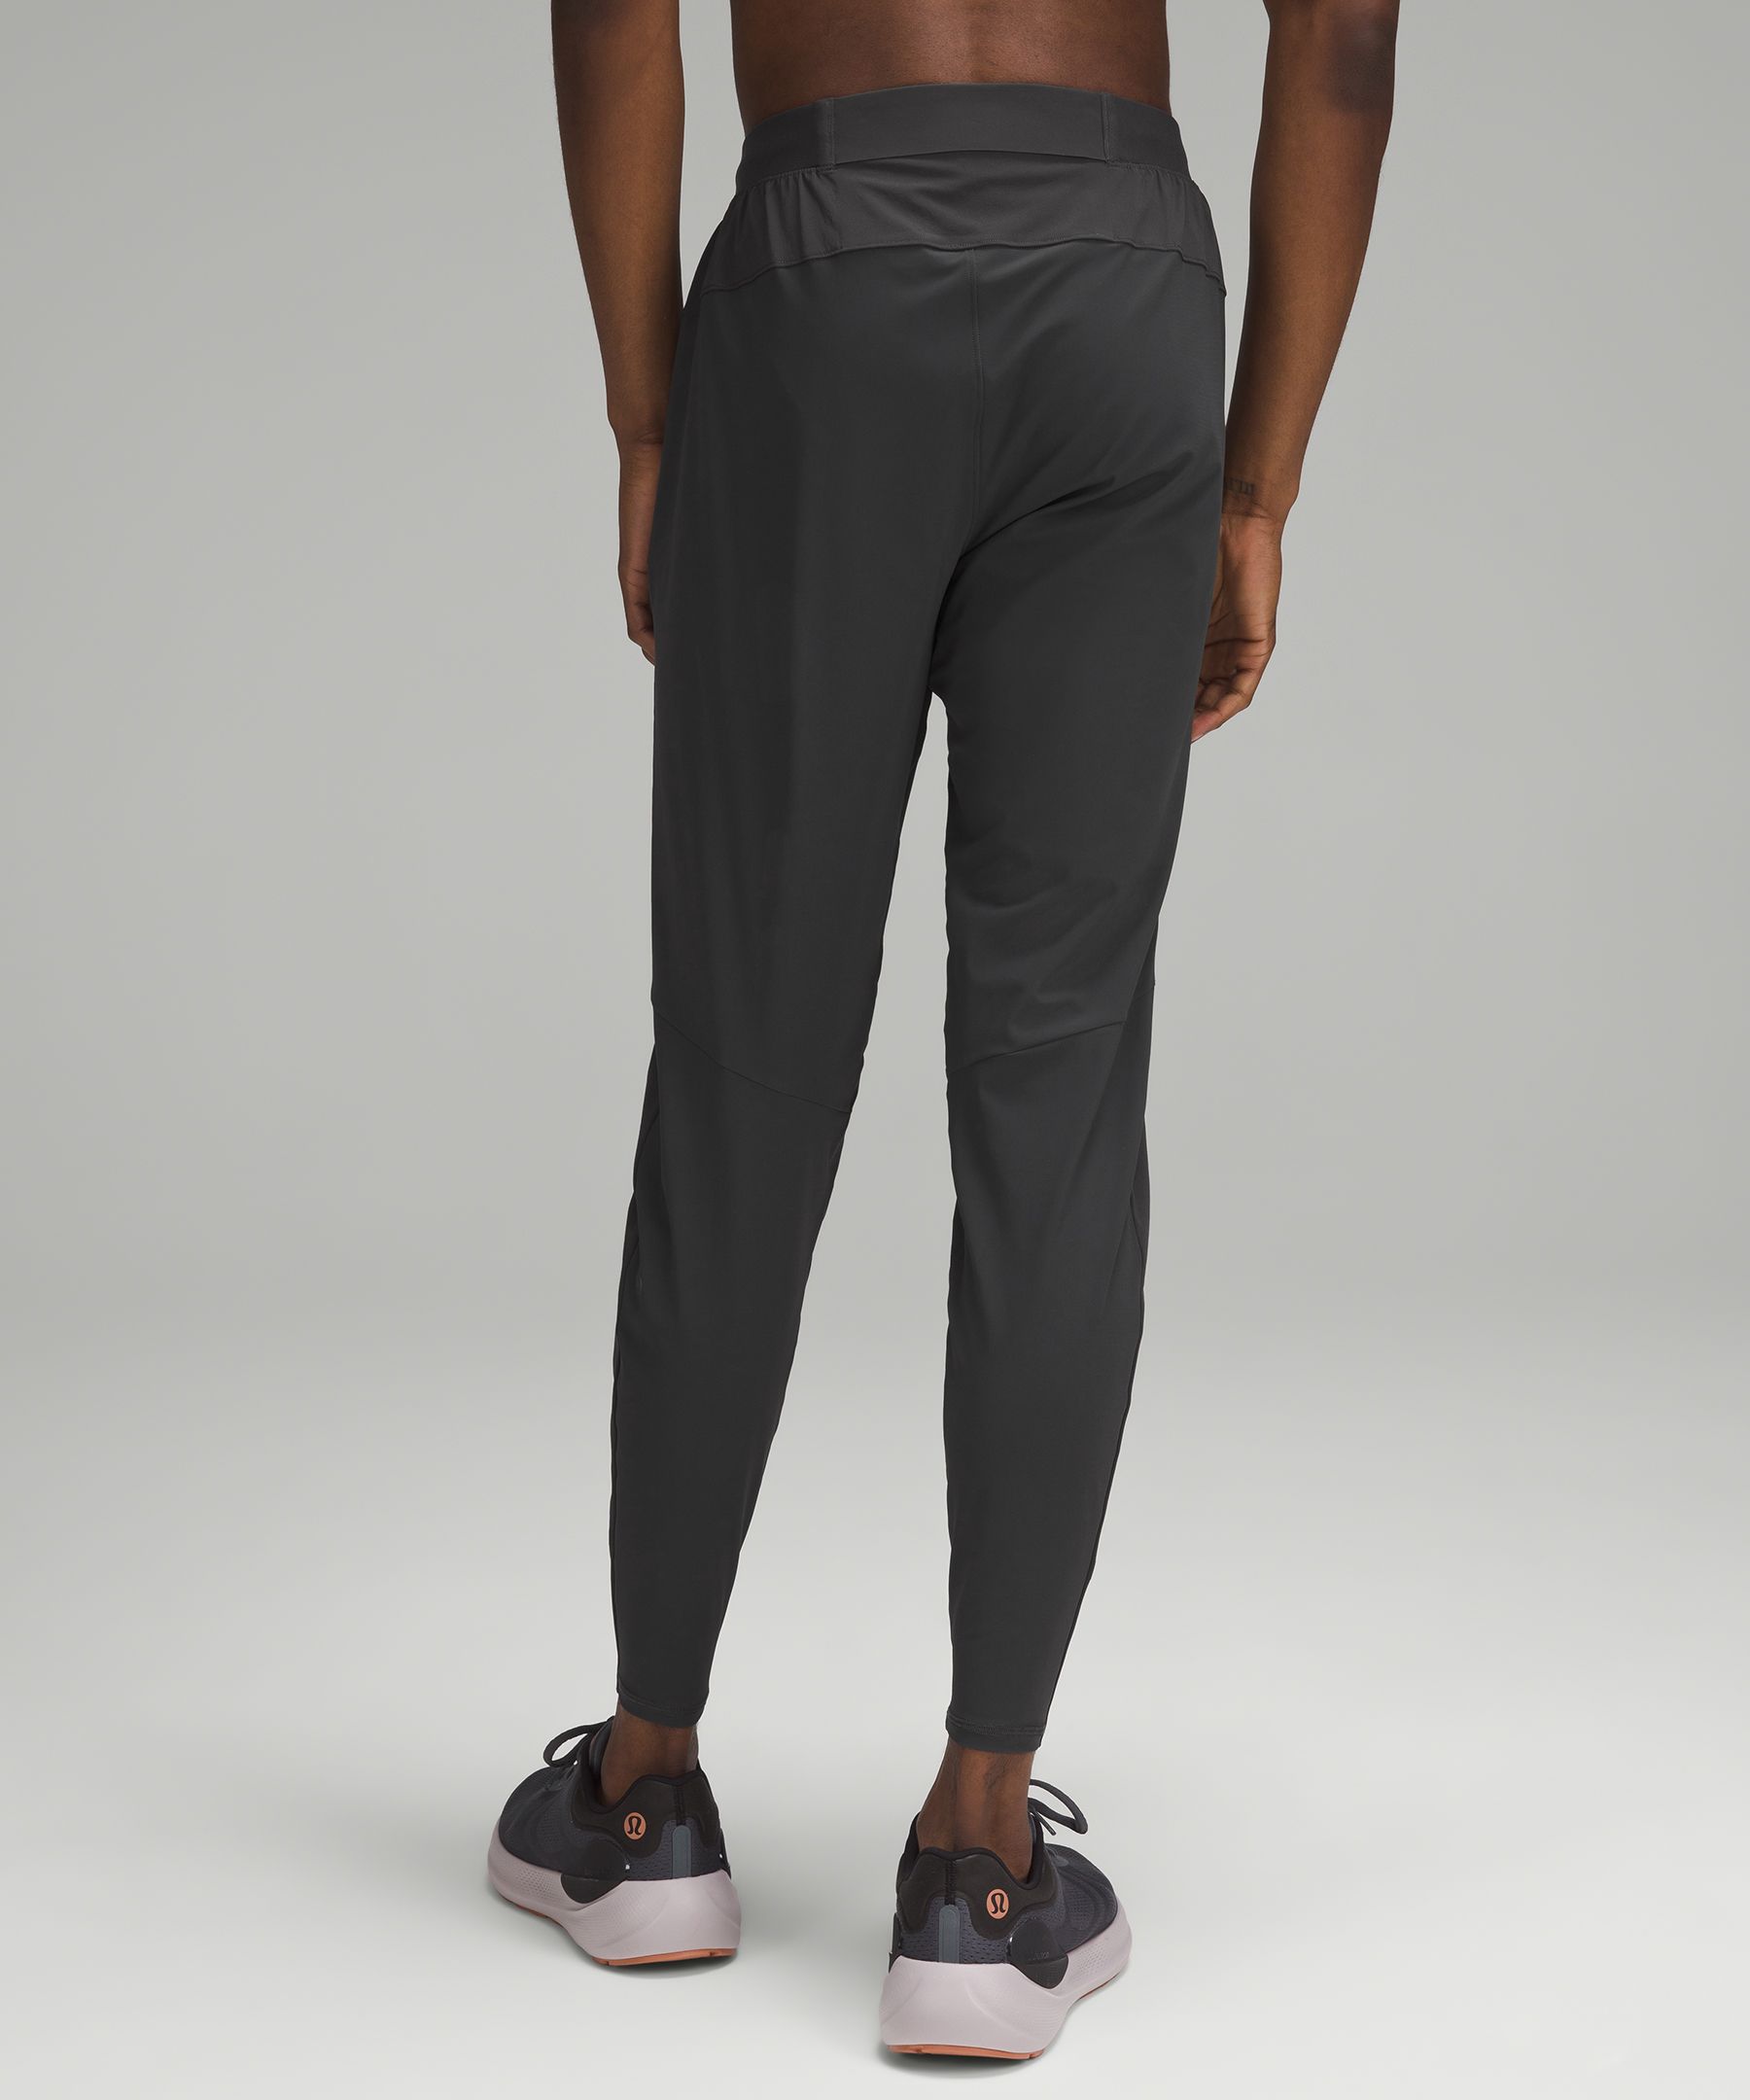 Our Newest Picks From Lululemon's We Made Too Much Sale Section